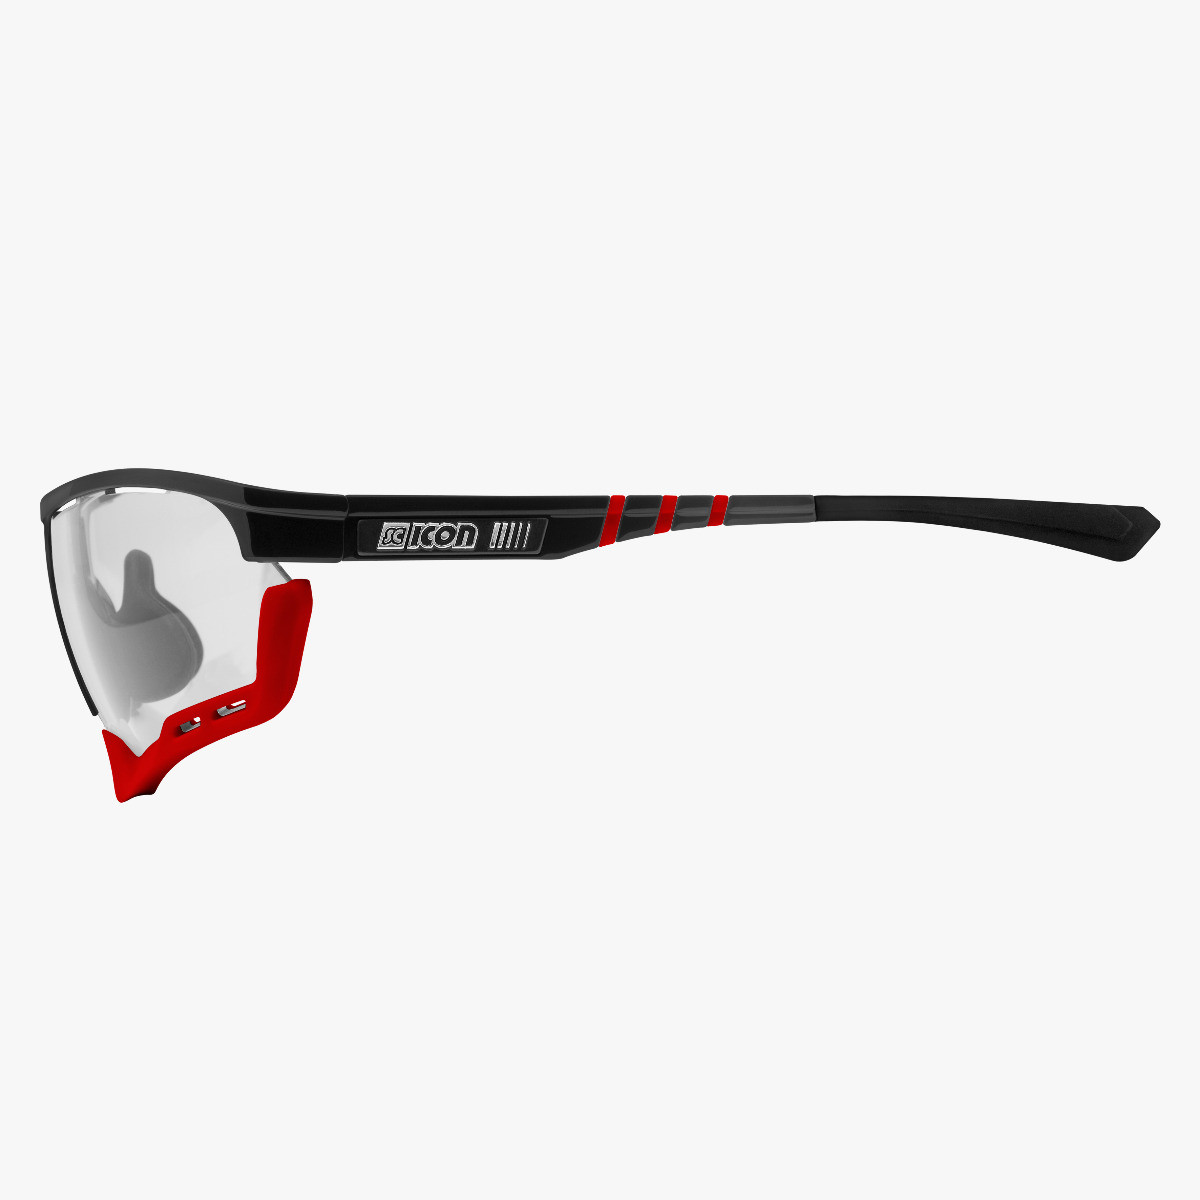 Scicon Sports | Aerocomfort Sport Cycling Performance Sunglasses - Black Gloss / Photocromatic Red - EY15160203